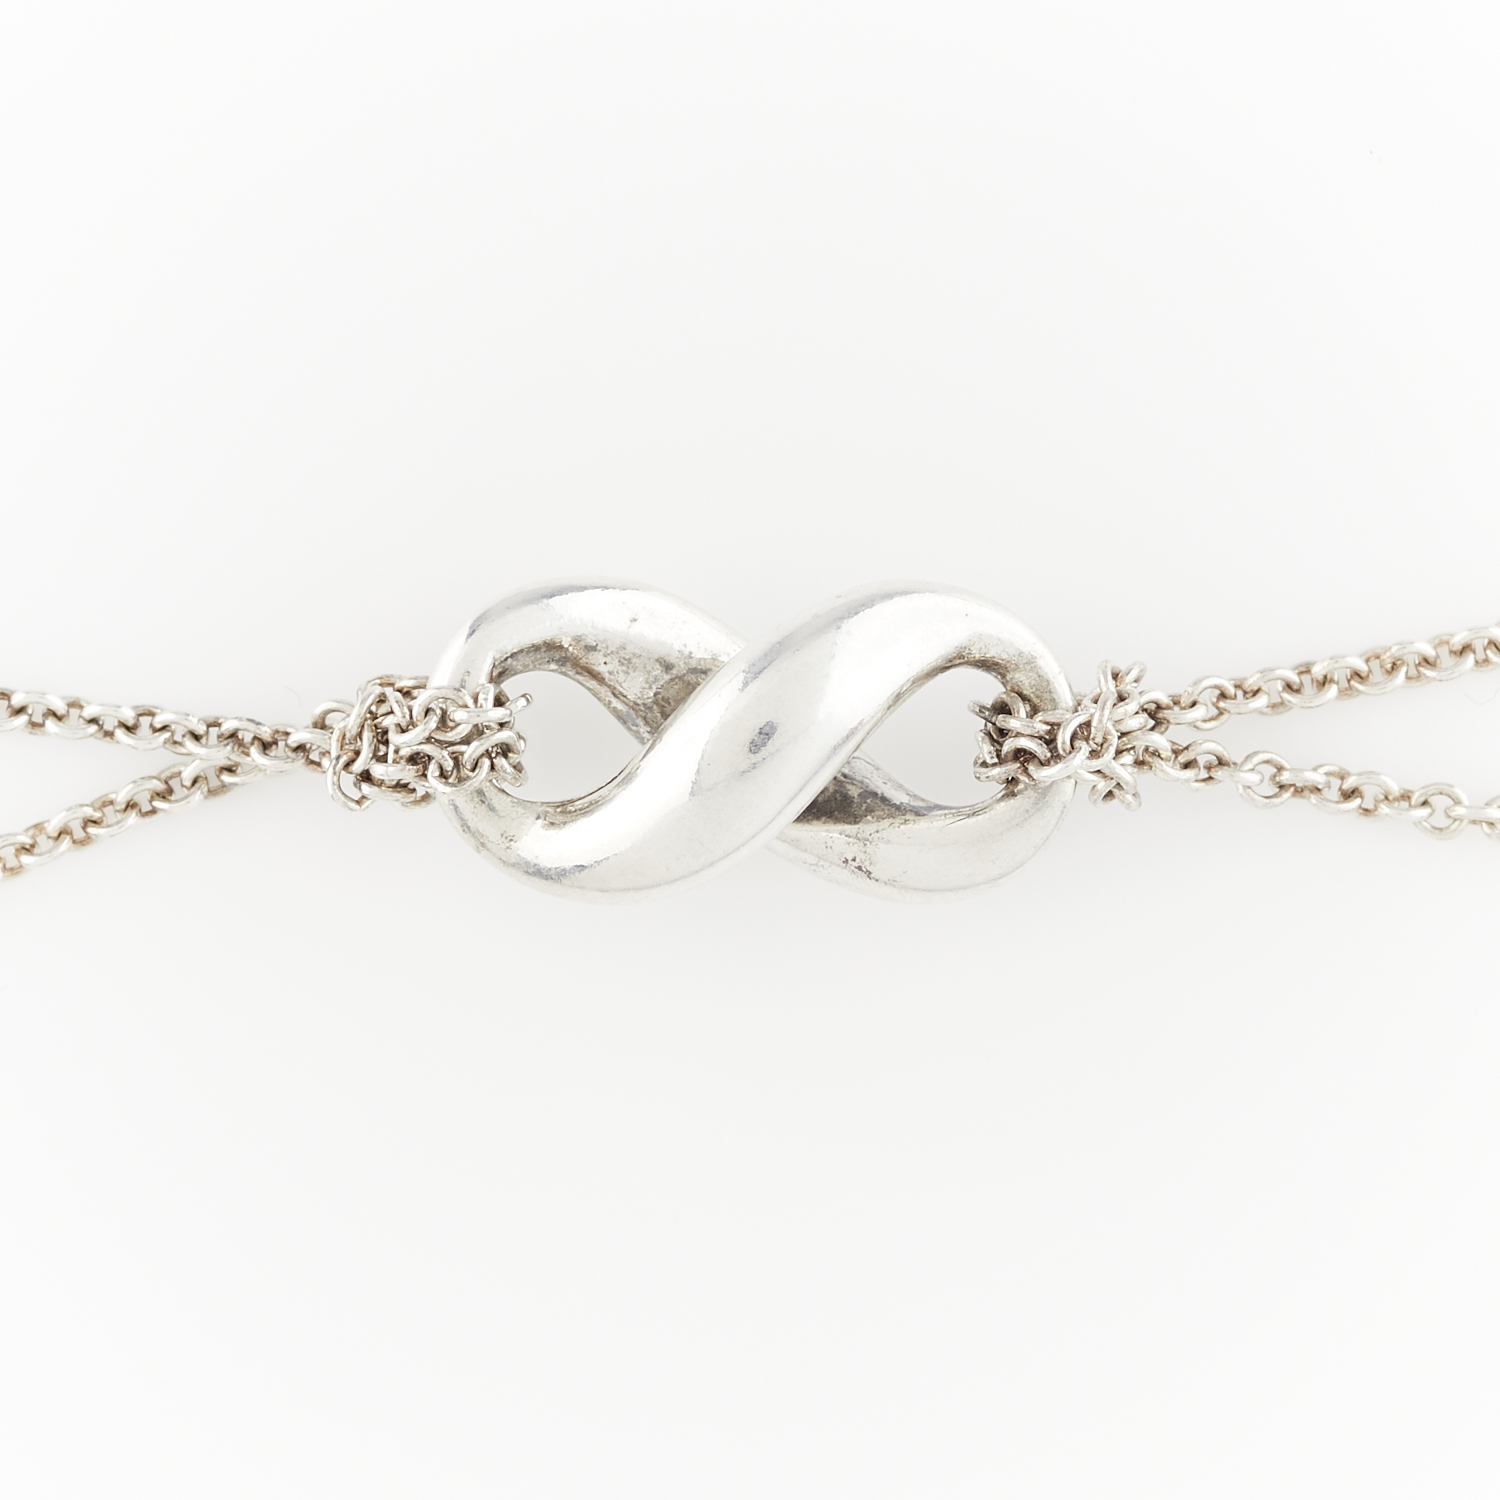 Tiffany & Co. Infinity Necklace - Image 5 of 8